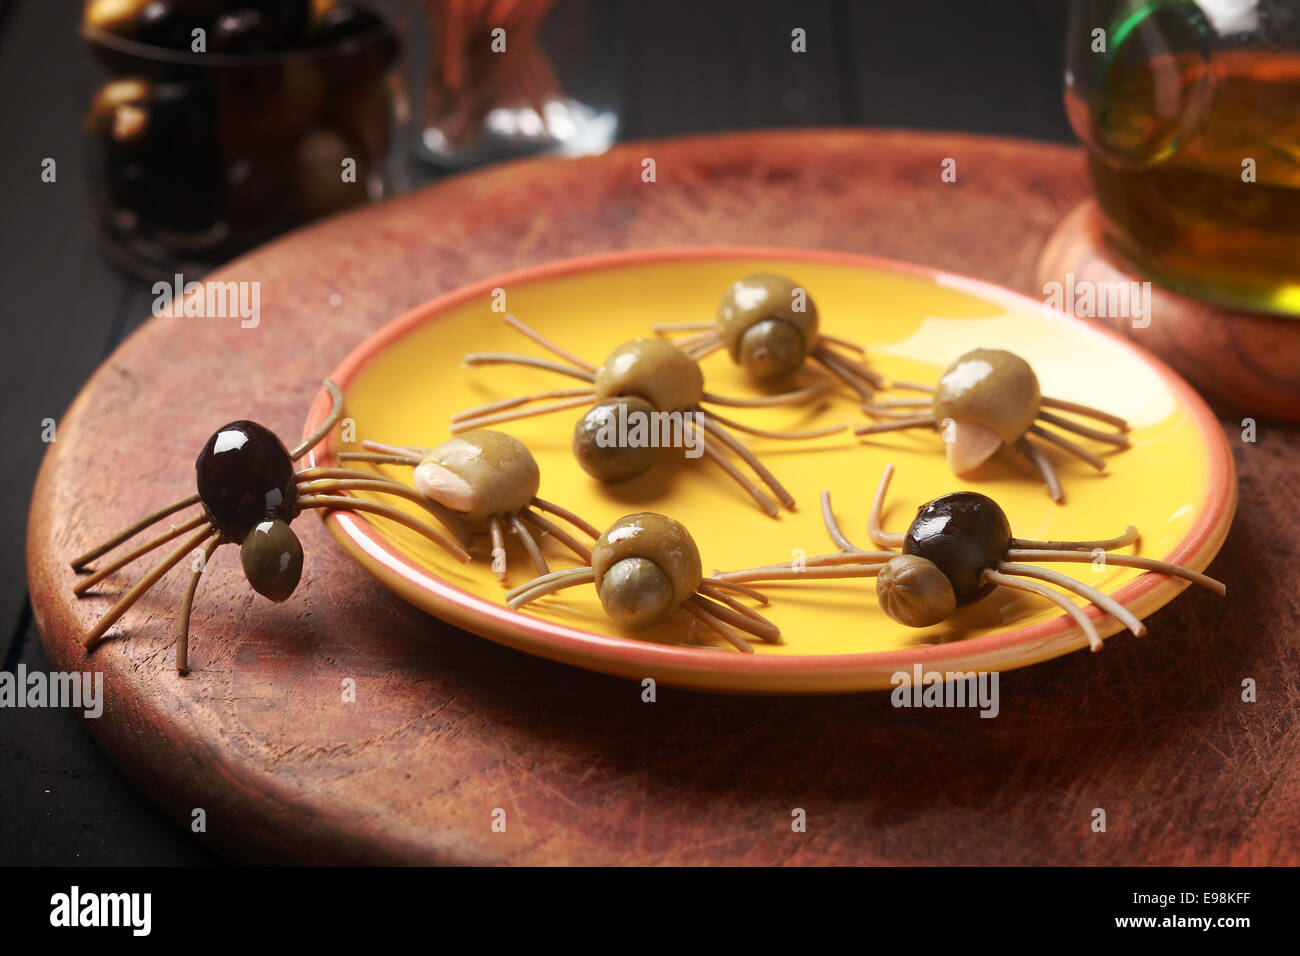 Creepy crawly edible Halloween spiders made from cured green and black olives with Italian spaghetti legs on a side table at a Halloween party for appetizers or favors for trick-ot-treating Stock Photo